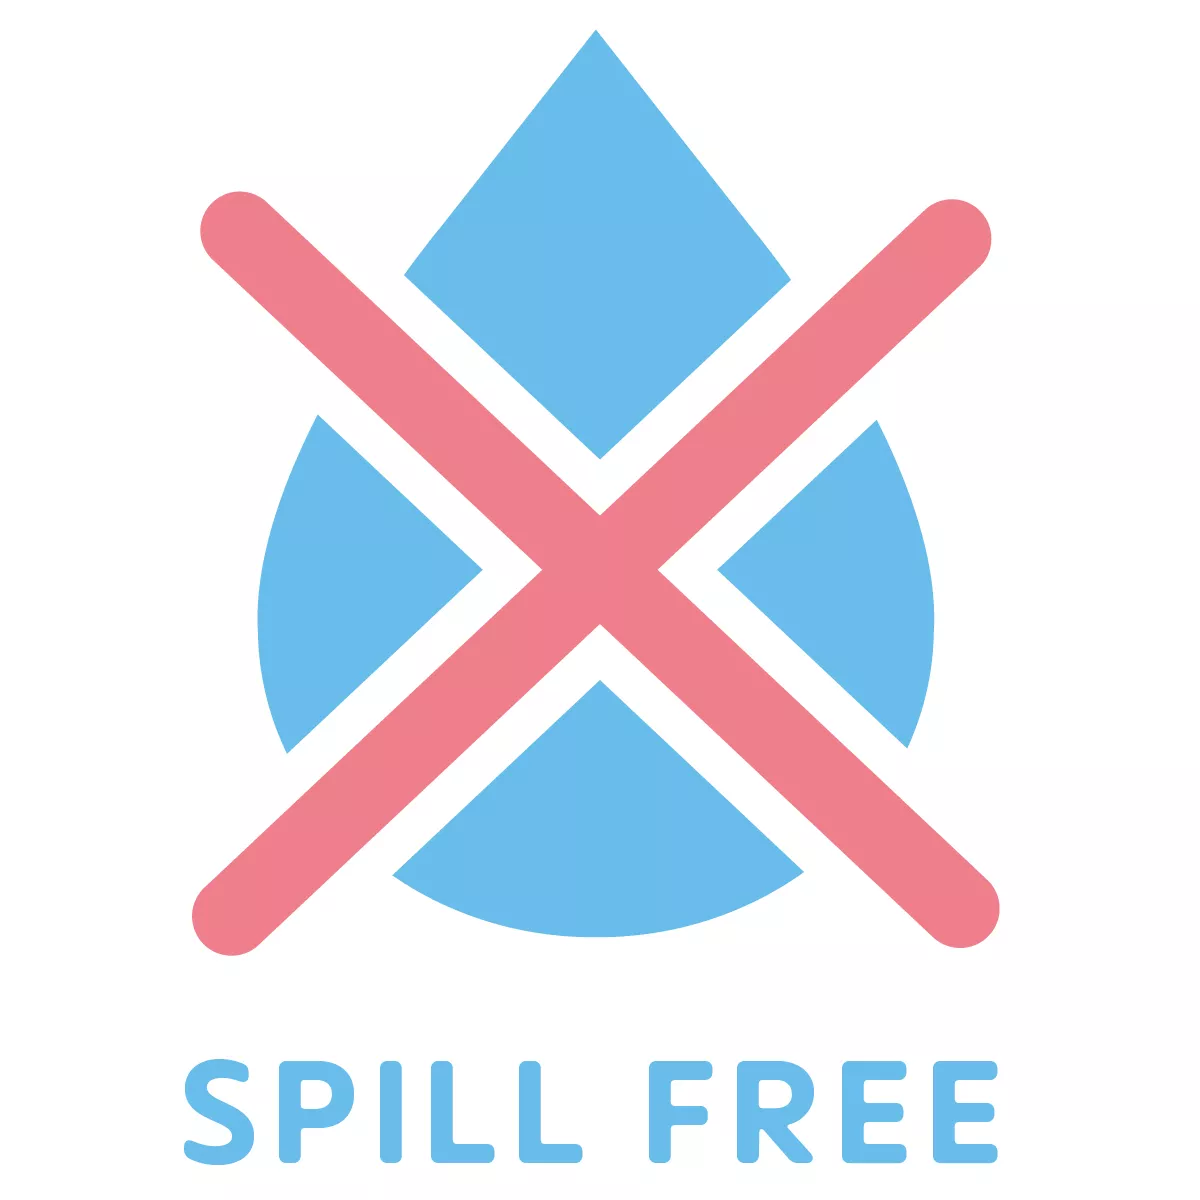 Spill free - for a first independent feeding